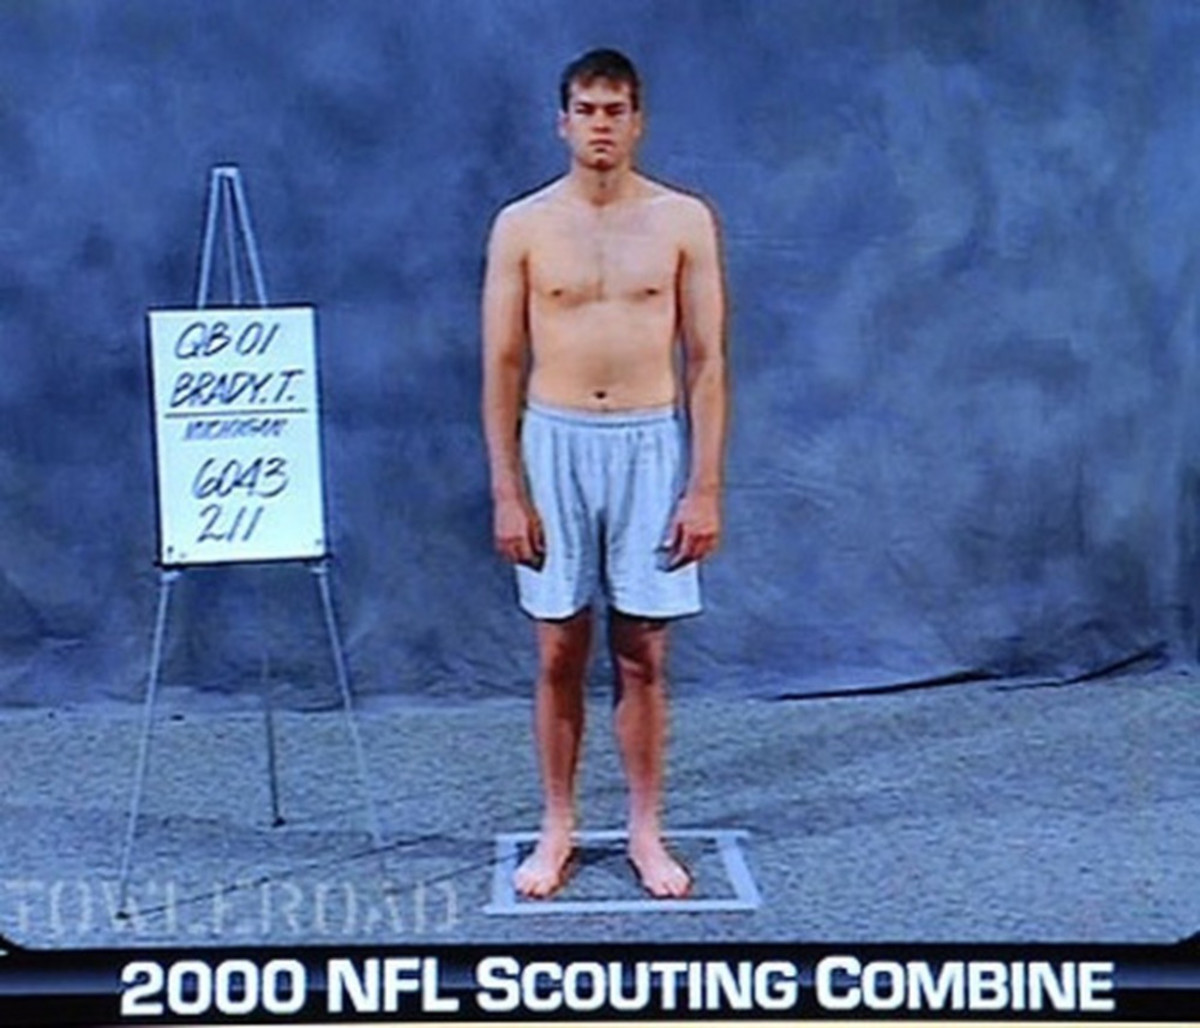 Brady at the combine. Does he look like an NFL QB?  I don't think I'd pick him for my company softball team. 